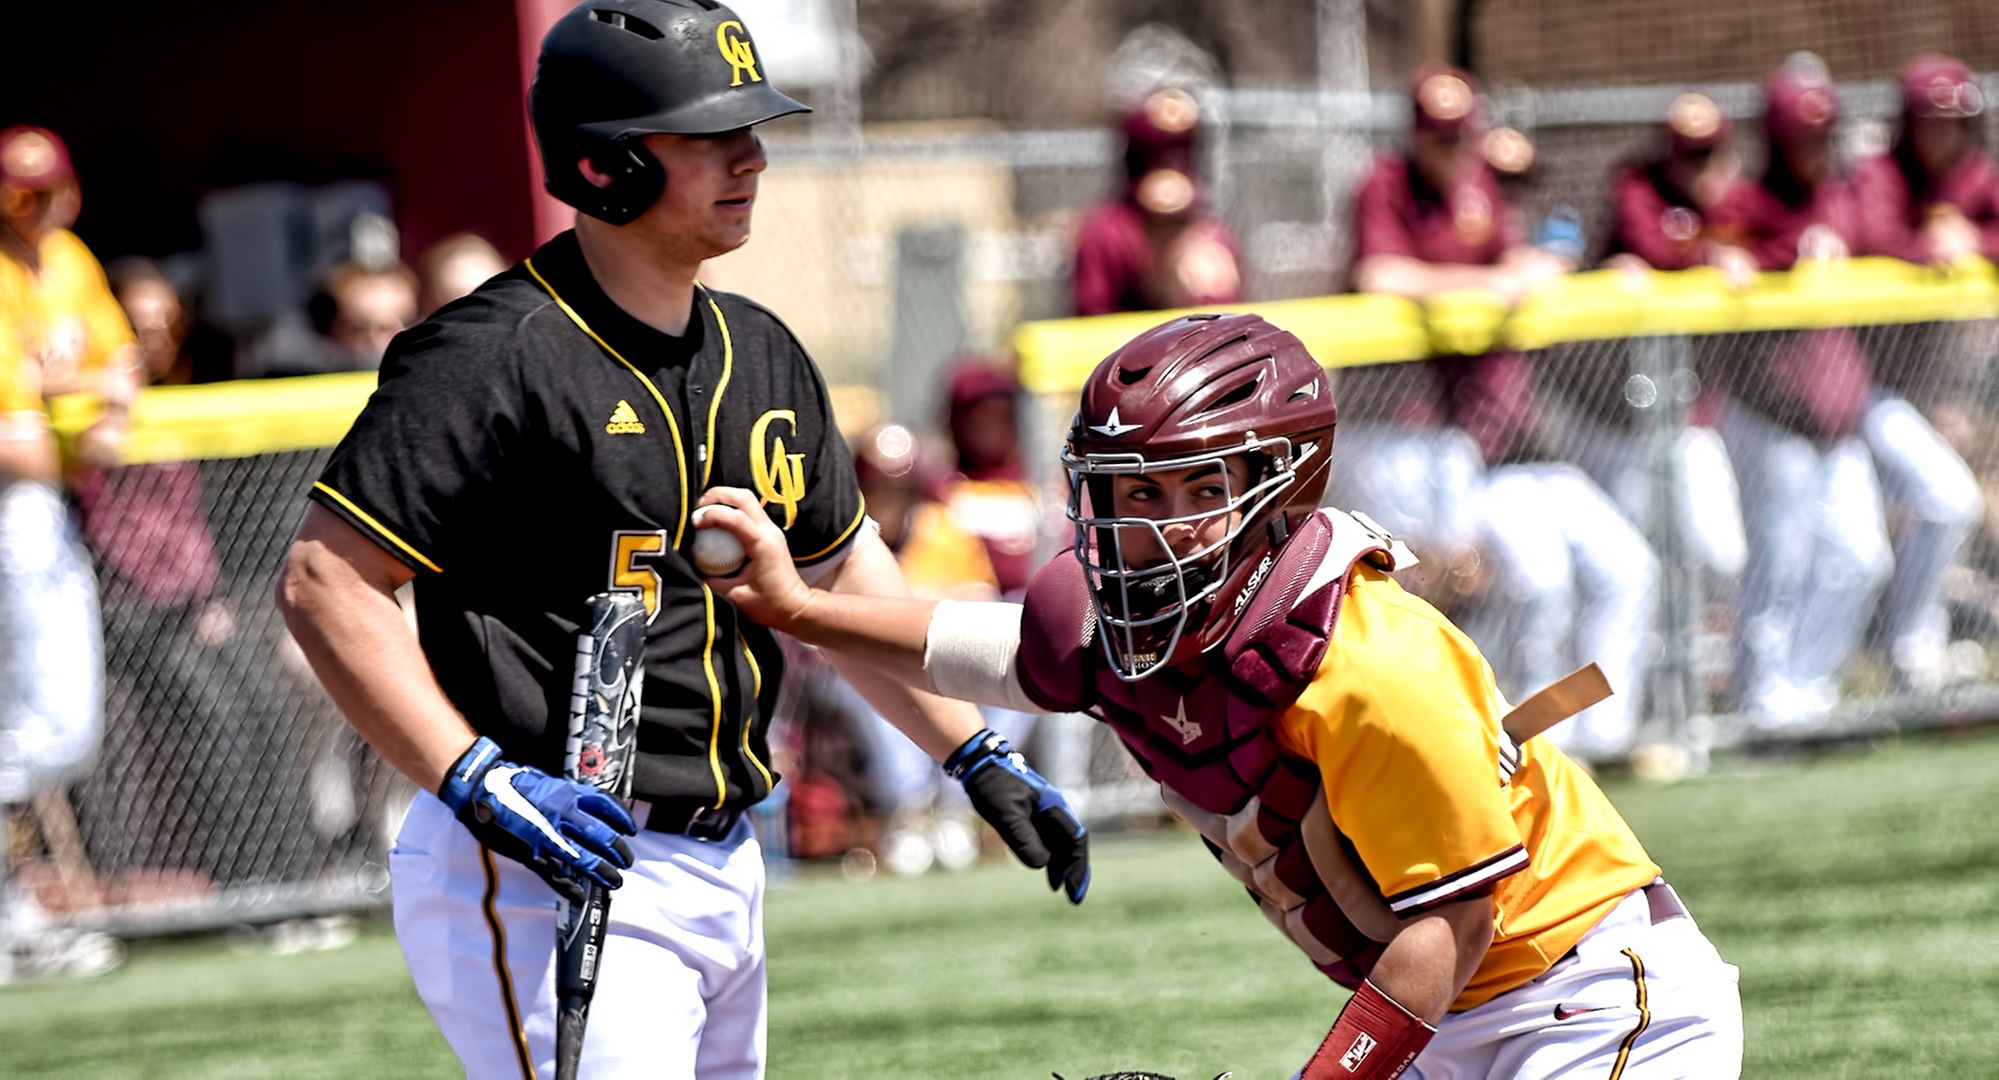 Junior catcher Alec Sames tags out a Gustavus hitter after a strikeout during the Cobbers' split with the Gusties.